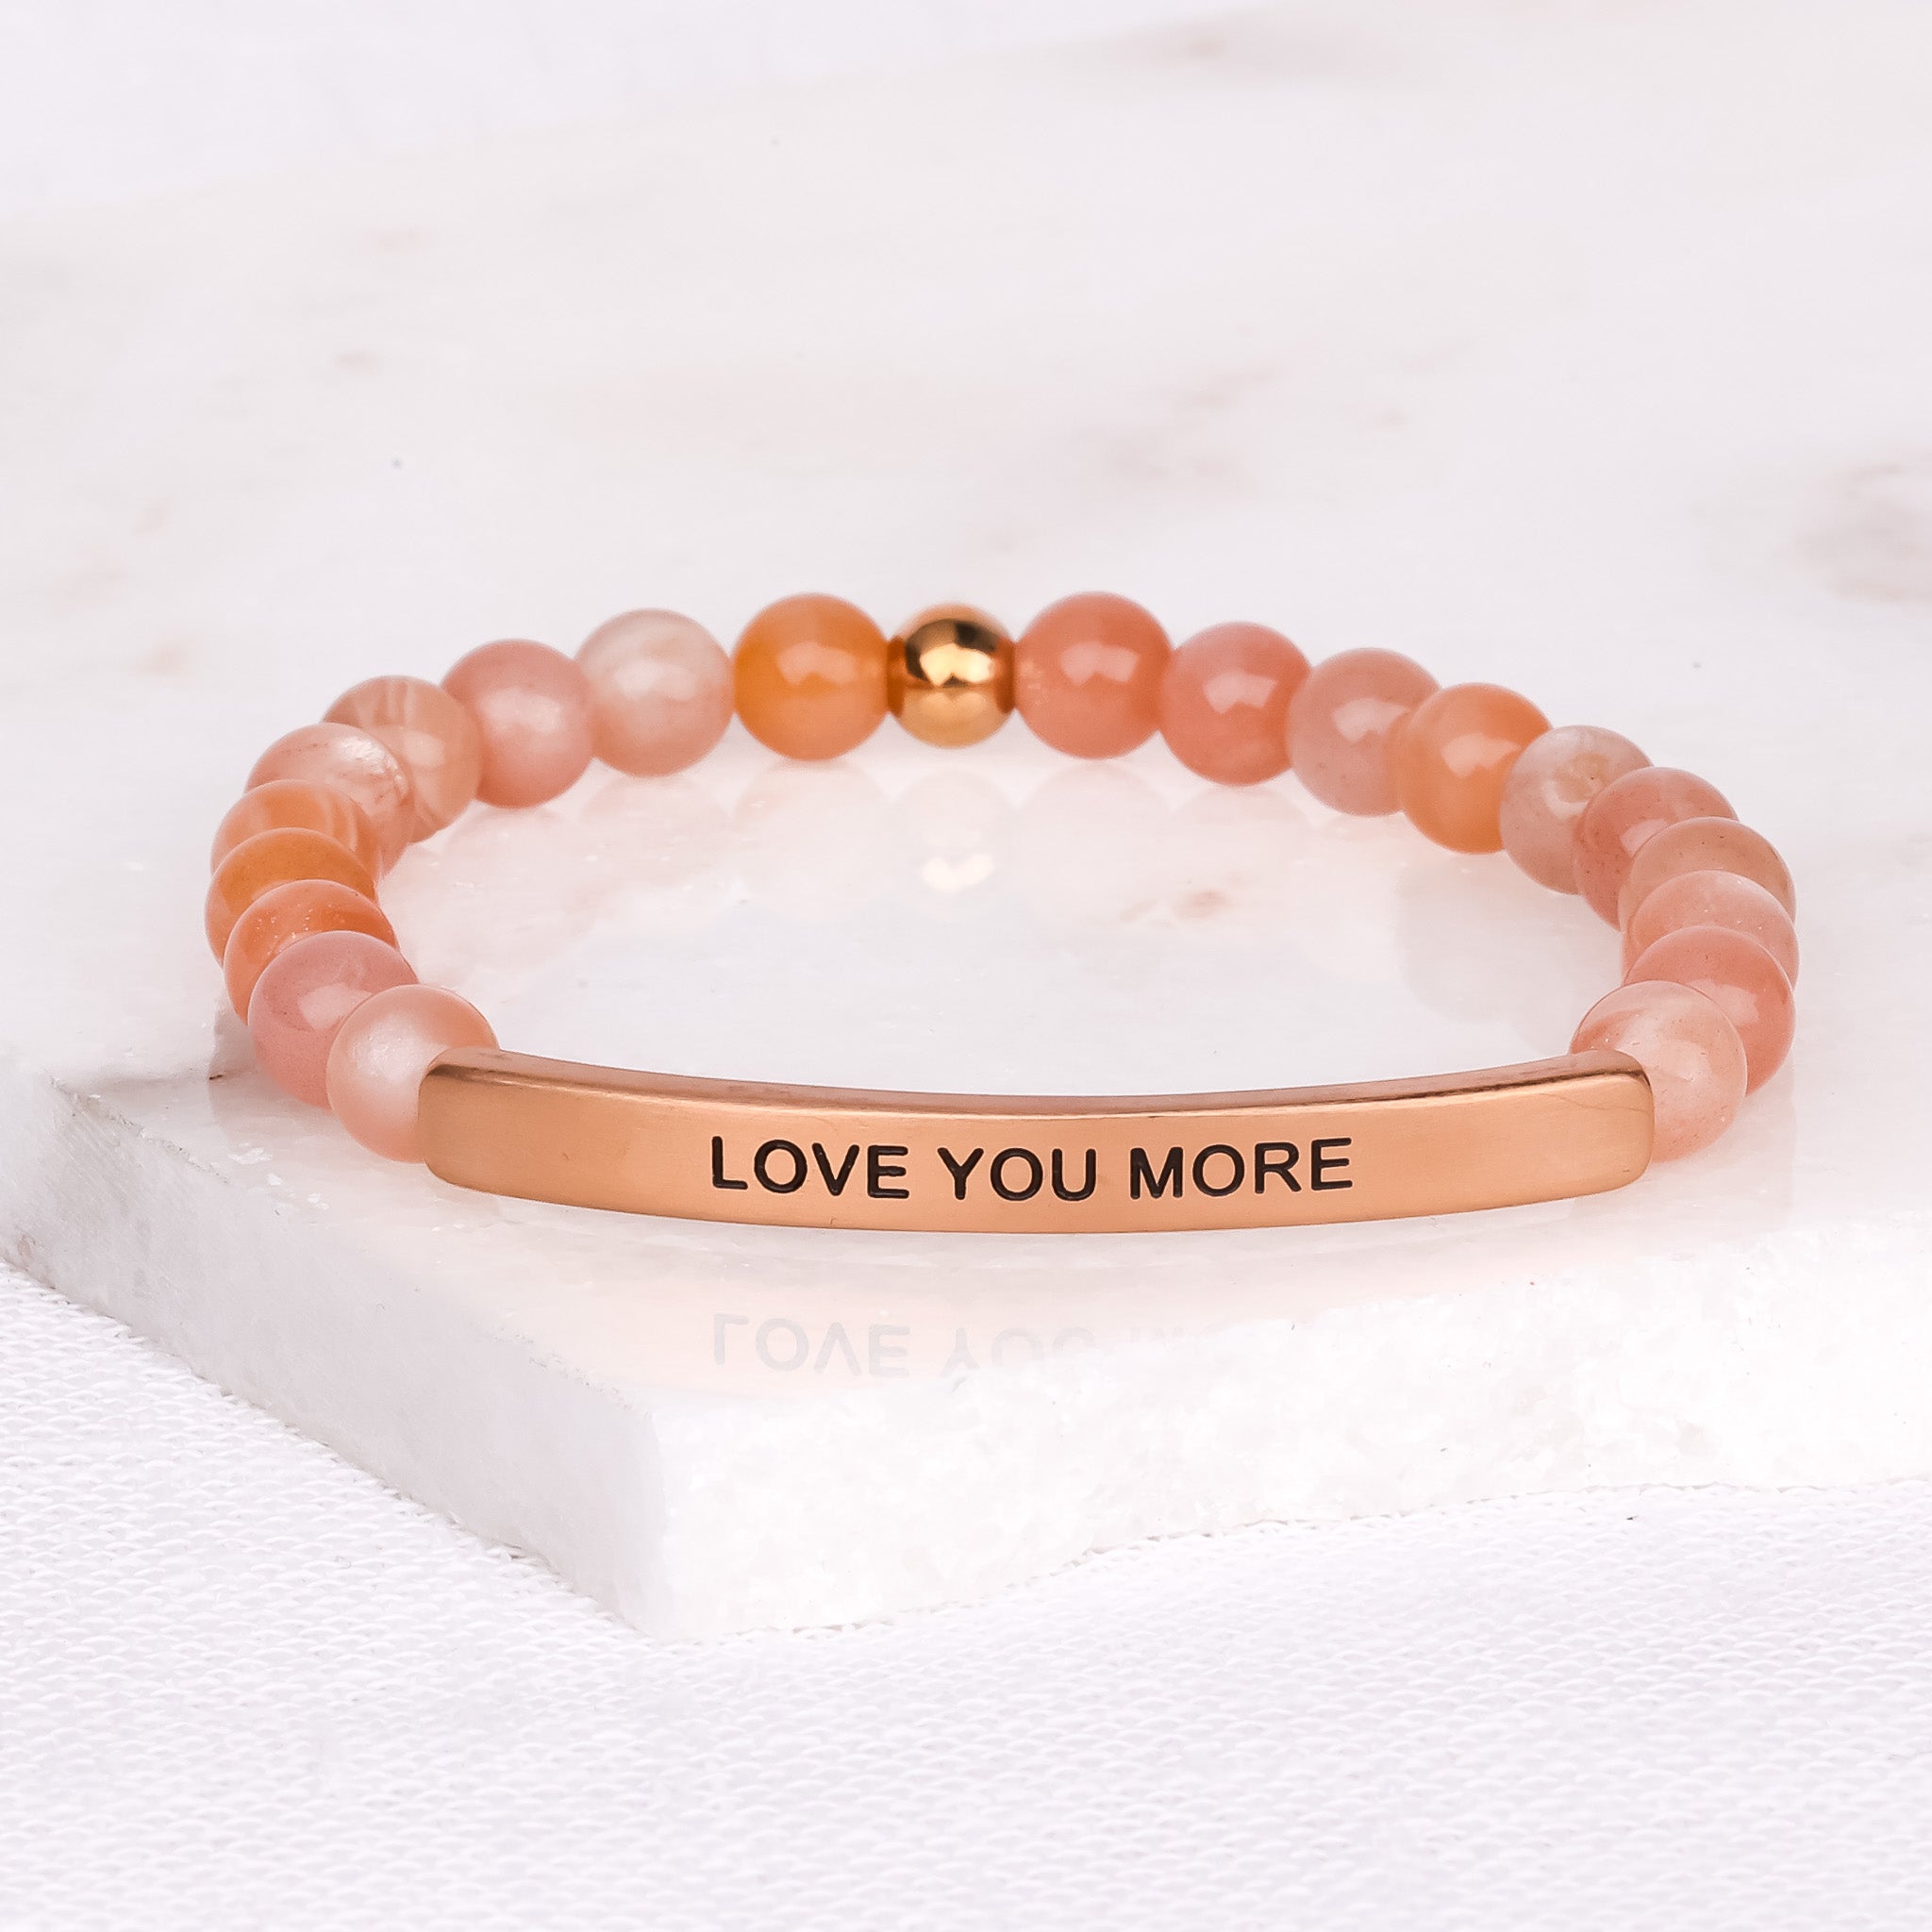 Inspire Me Bracelets -Love You More Sunstone / Small (6in-7in) Average Woman Size